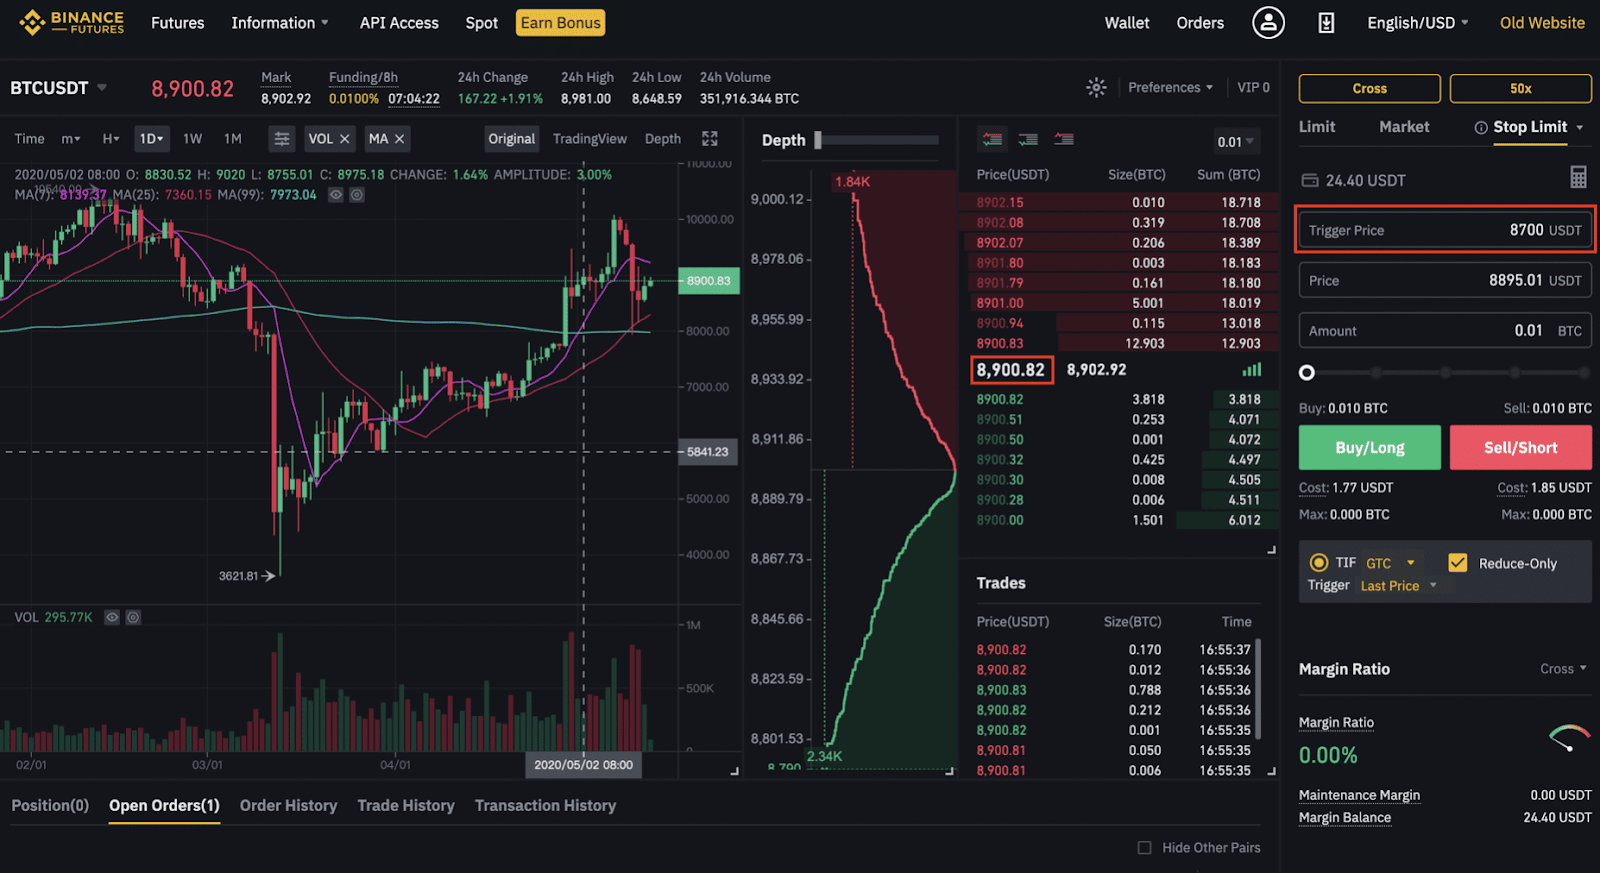 How to use Stop loss and take profit with futures - Futures API - Binance Developer Community